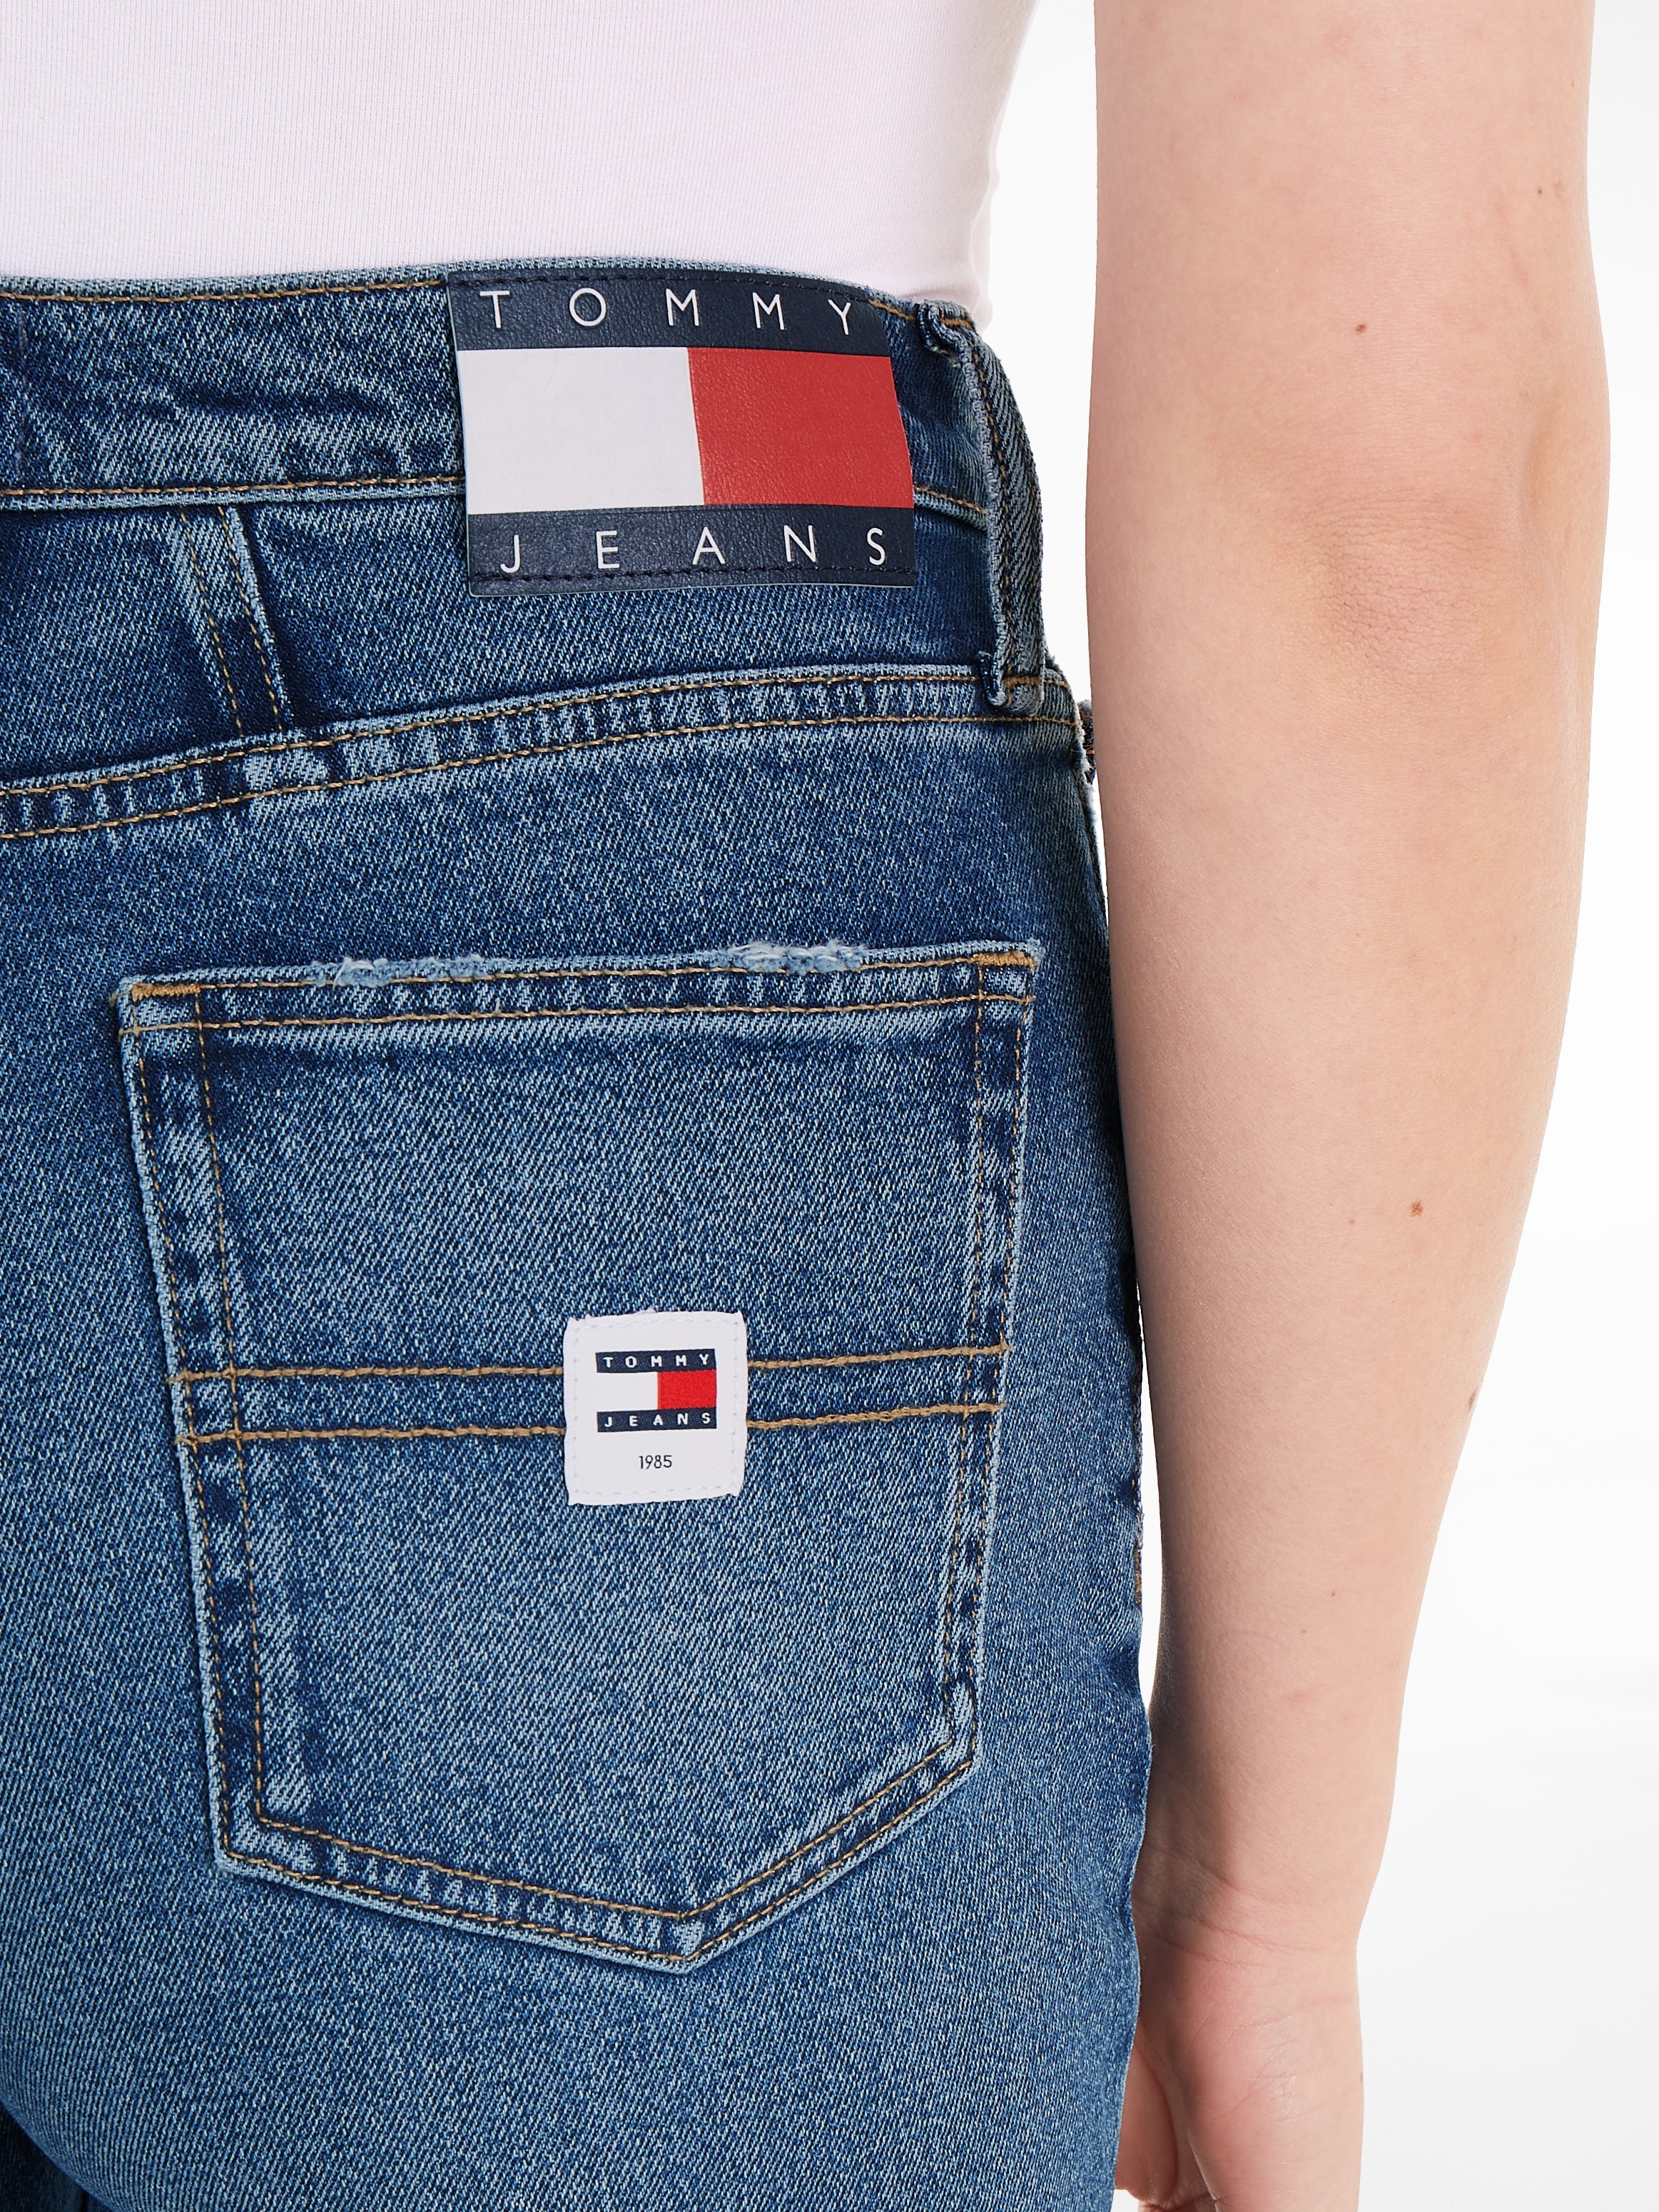 Flag Jeans Logo-Badge Mom-Jeans SLIM & kaufen Jeans Tommy CG4215«, UH Tommy »MOM mit